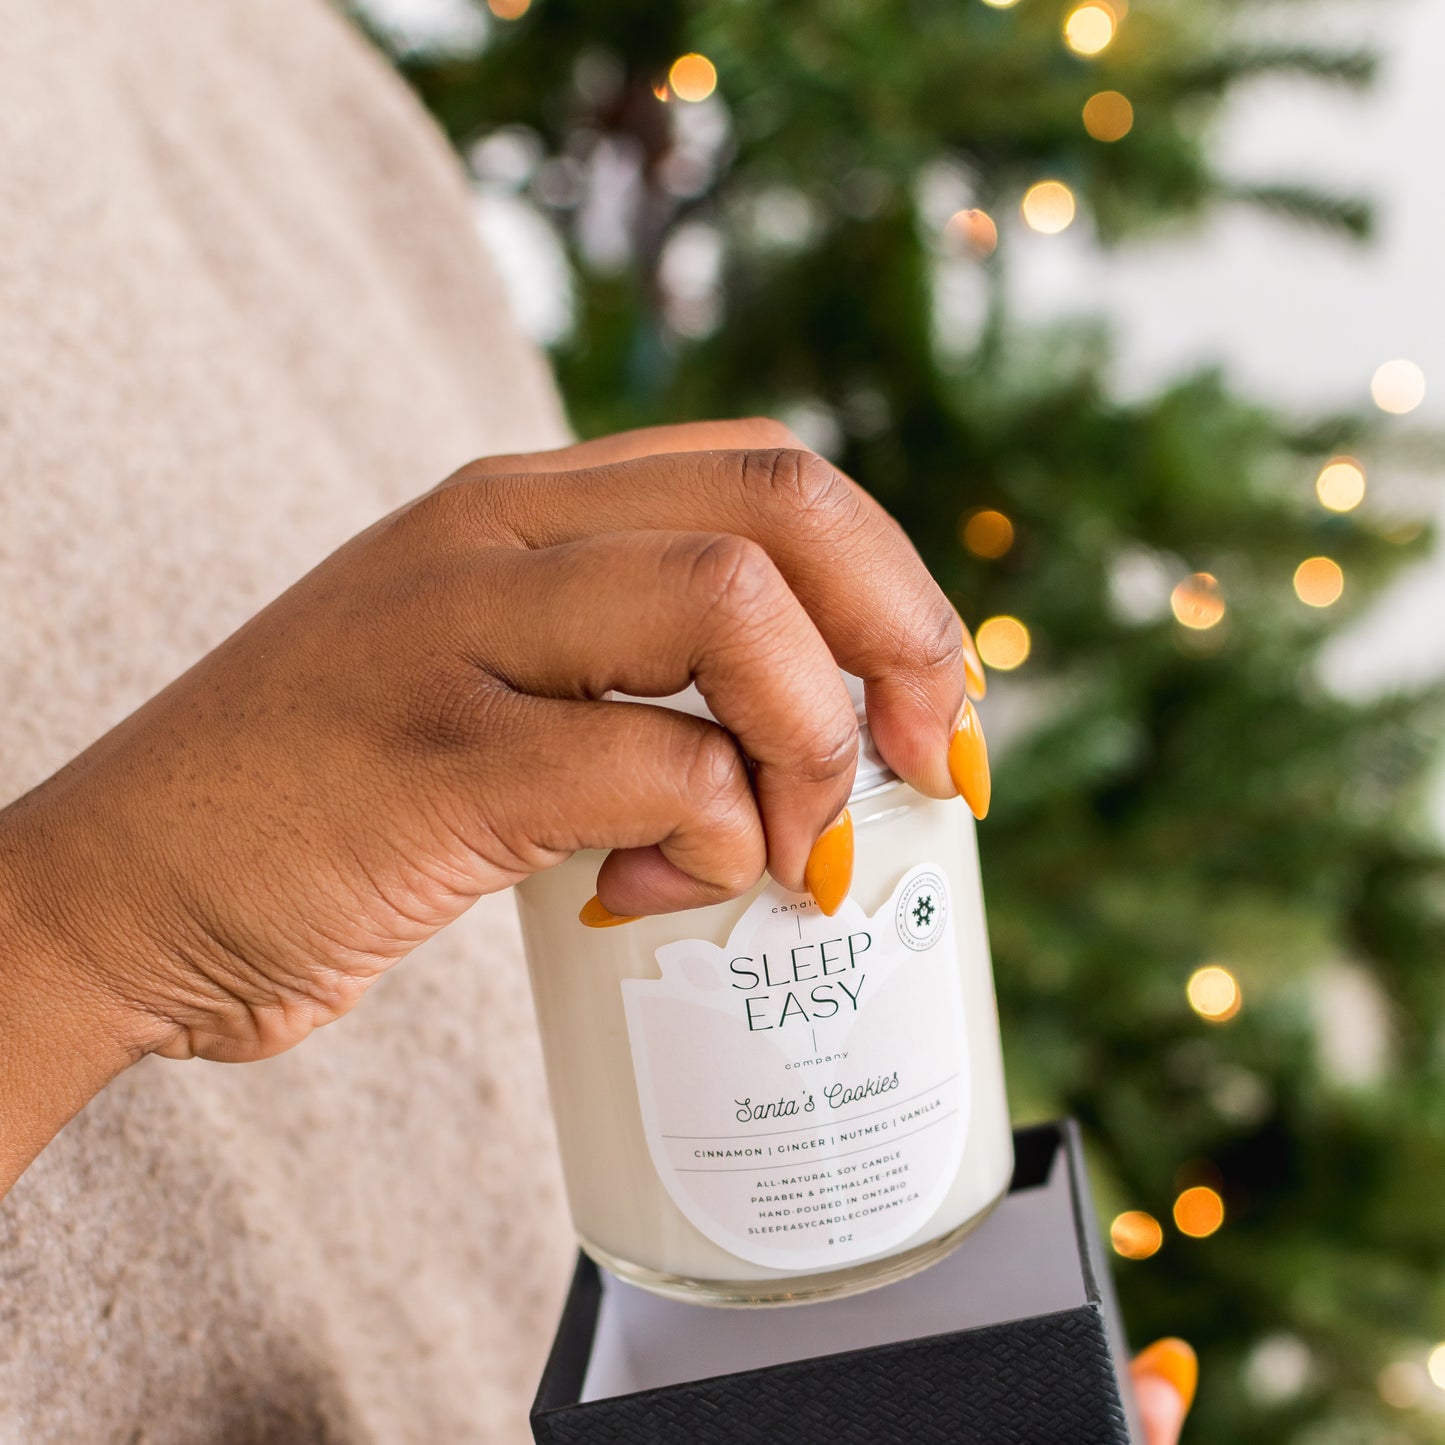 Eco friendly soy candle is being lifted out of a gift box in front of a christmas tree. The Christmas tree is lit with Christmas lights. 